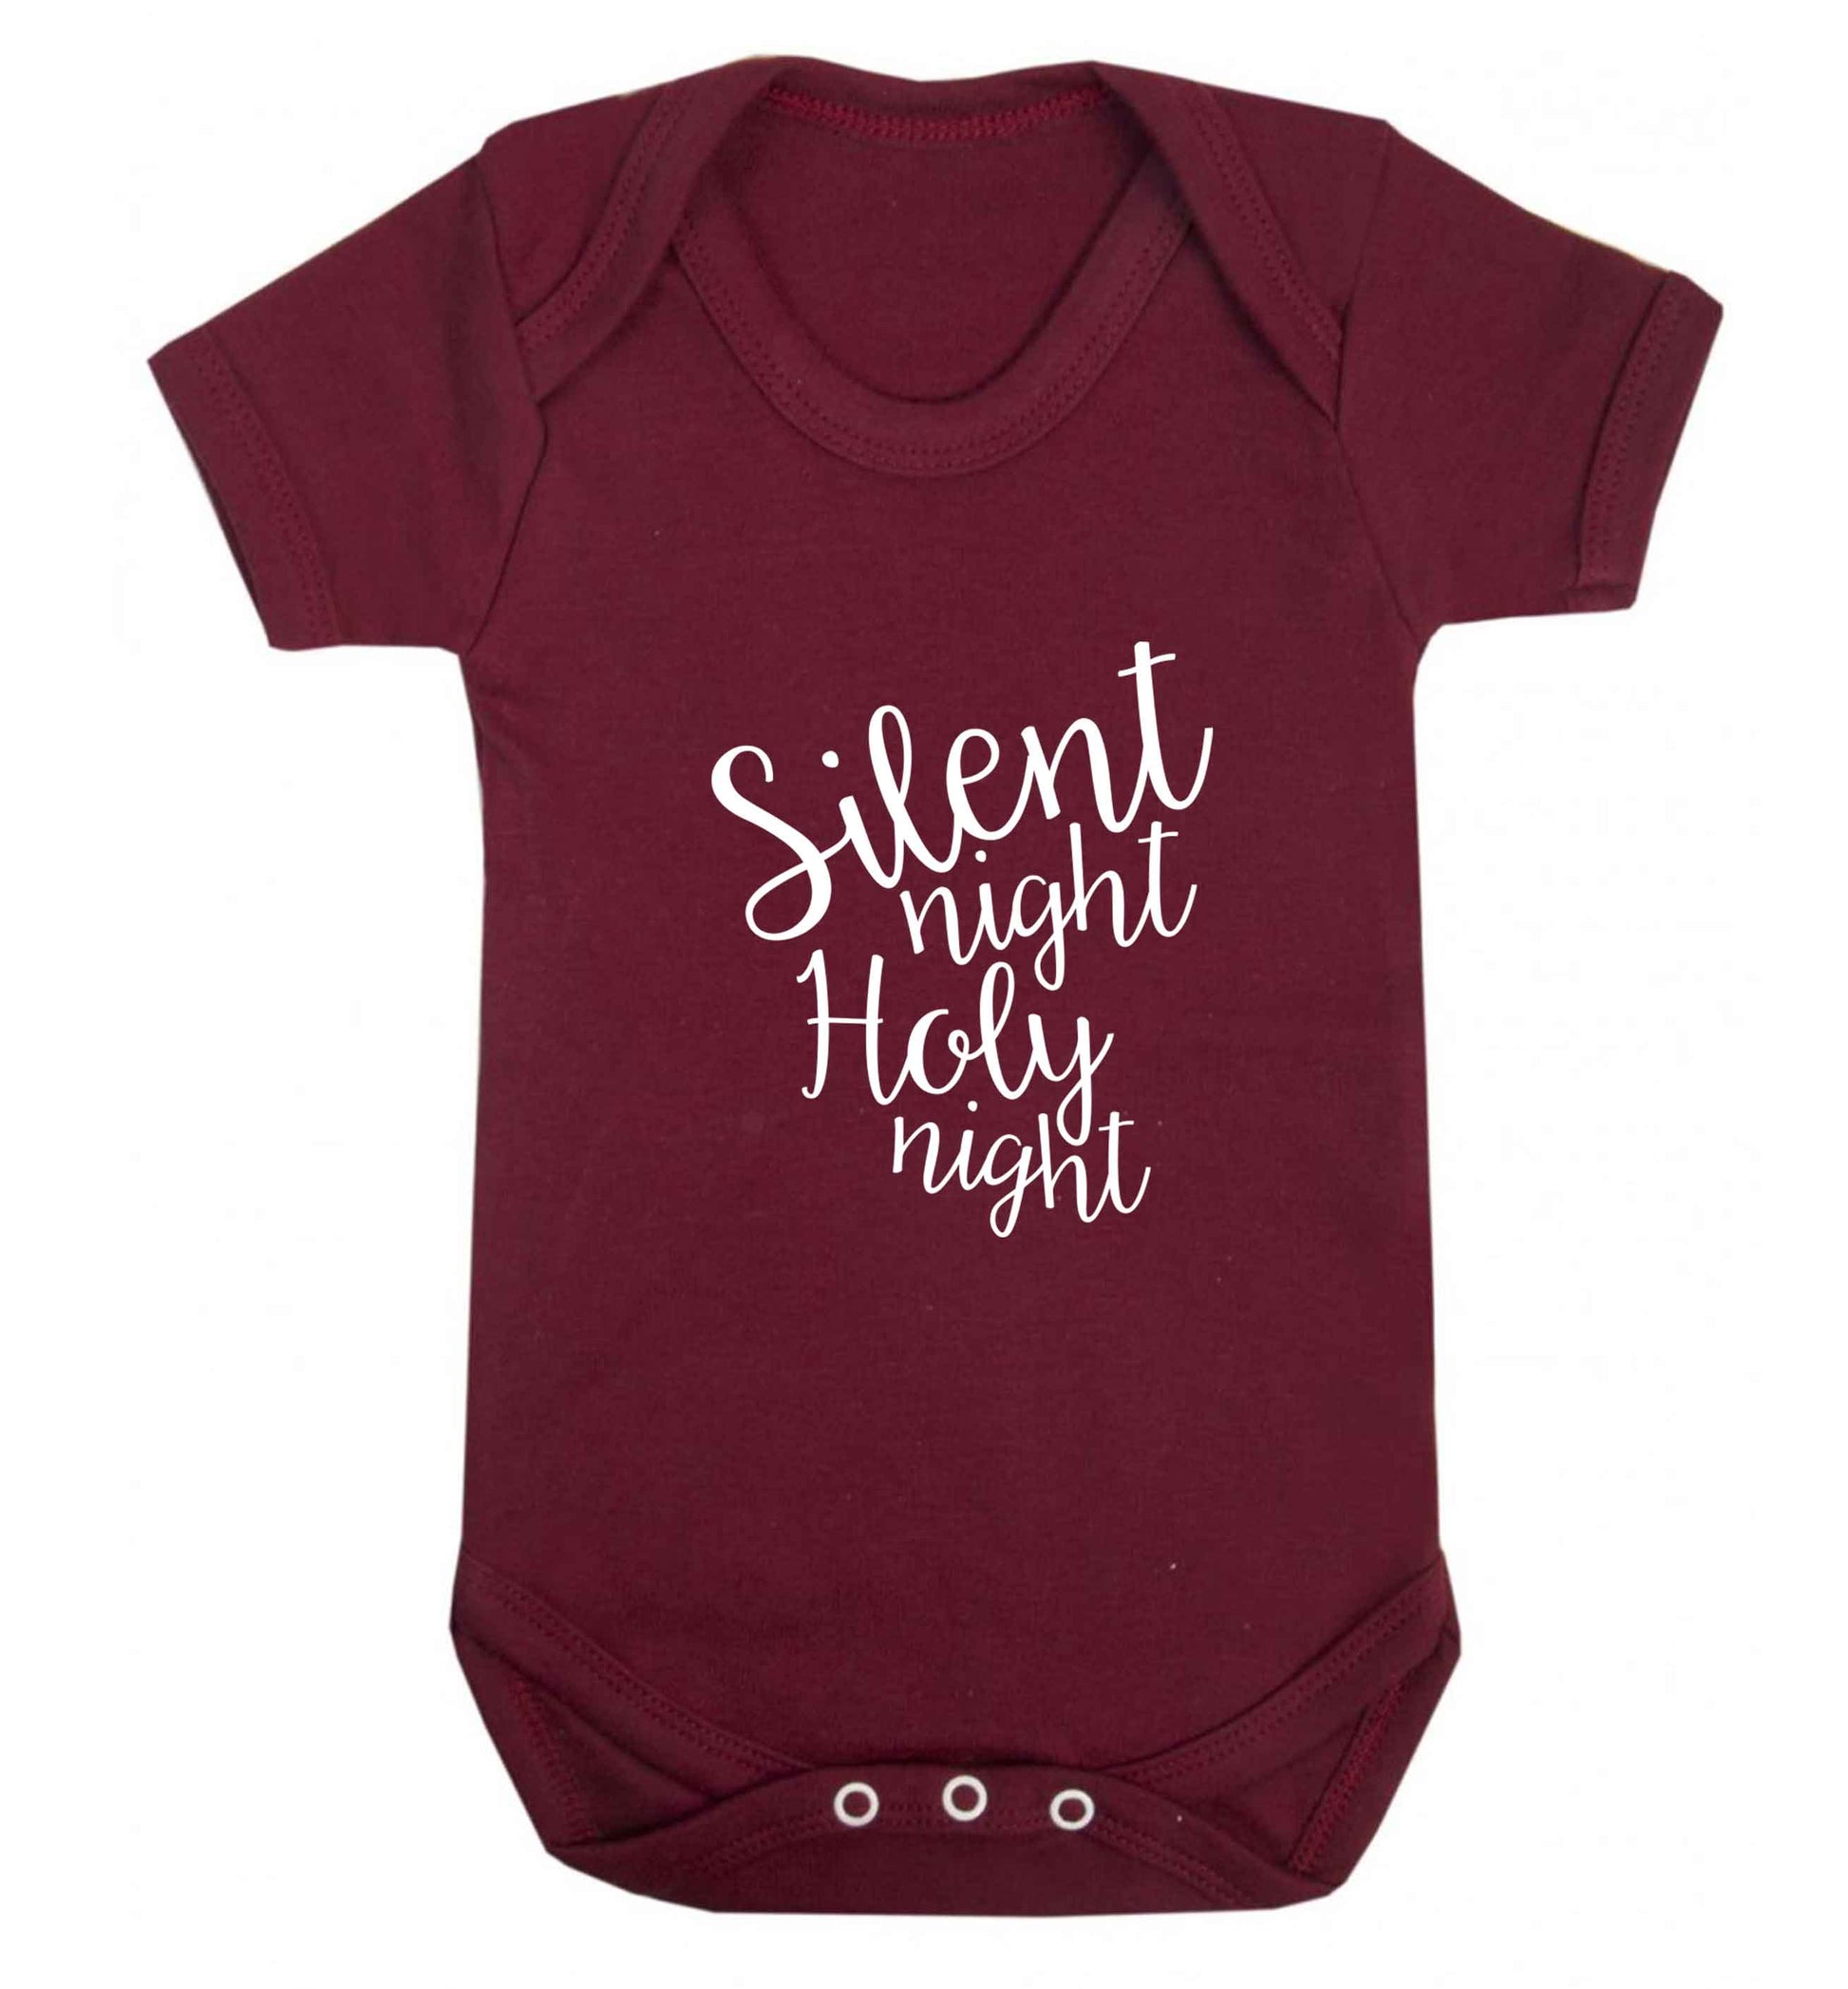 Silent night holy night baby vest maroon 18-24 months